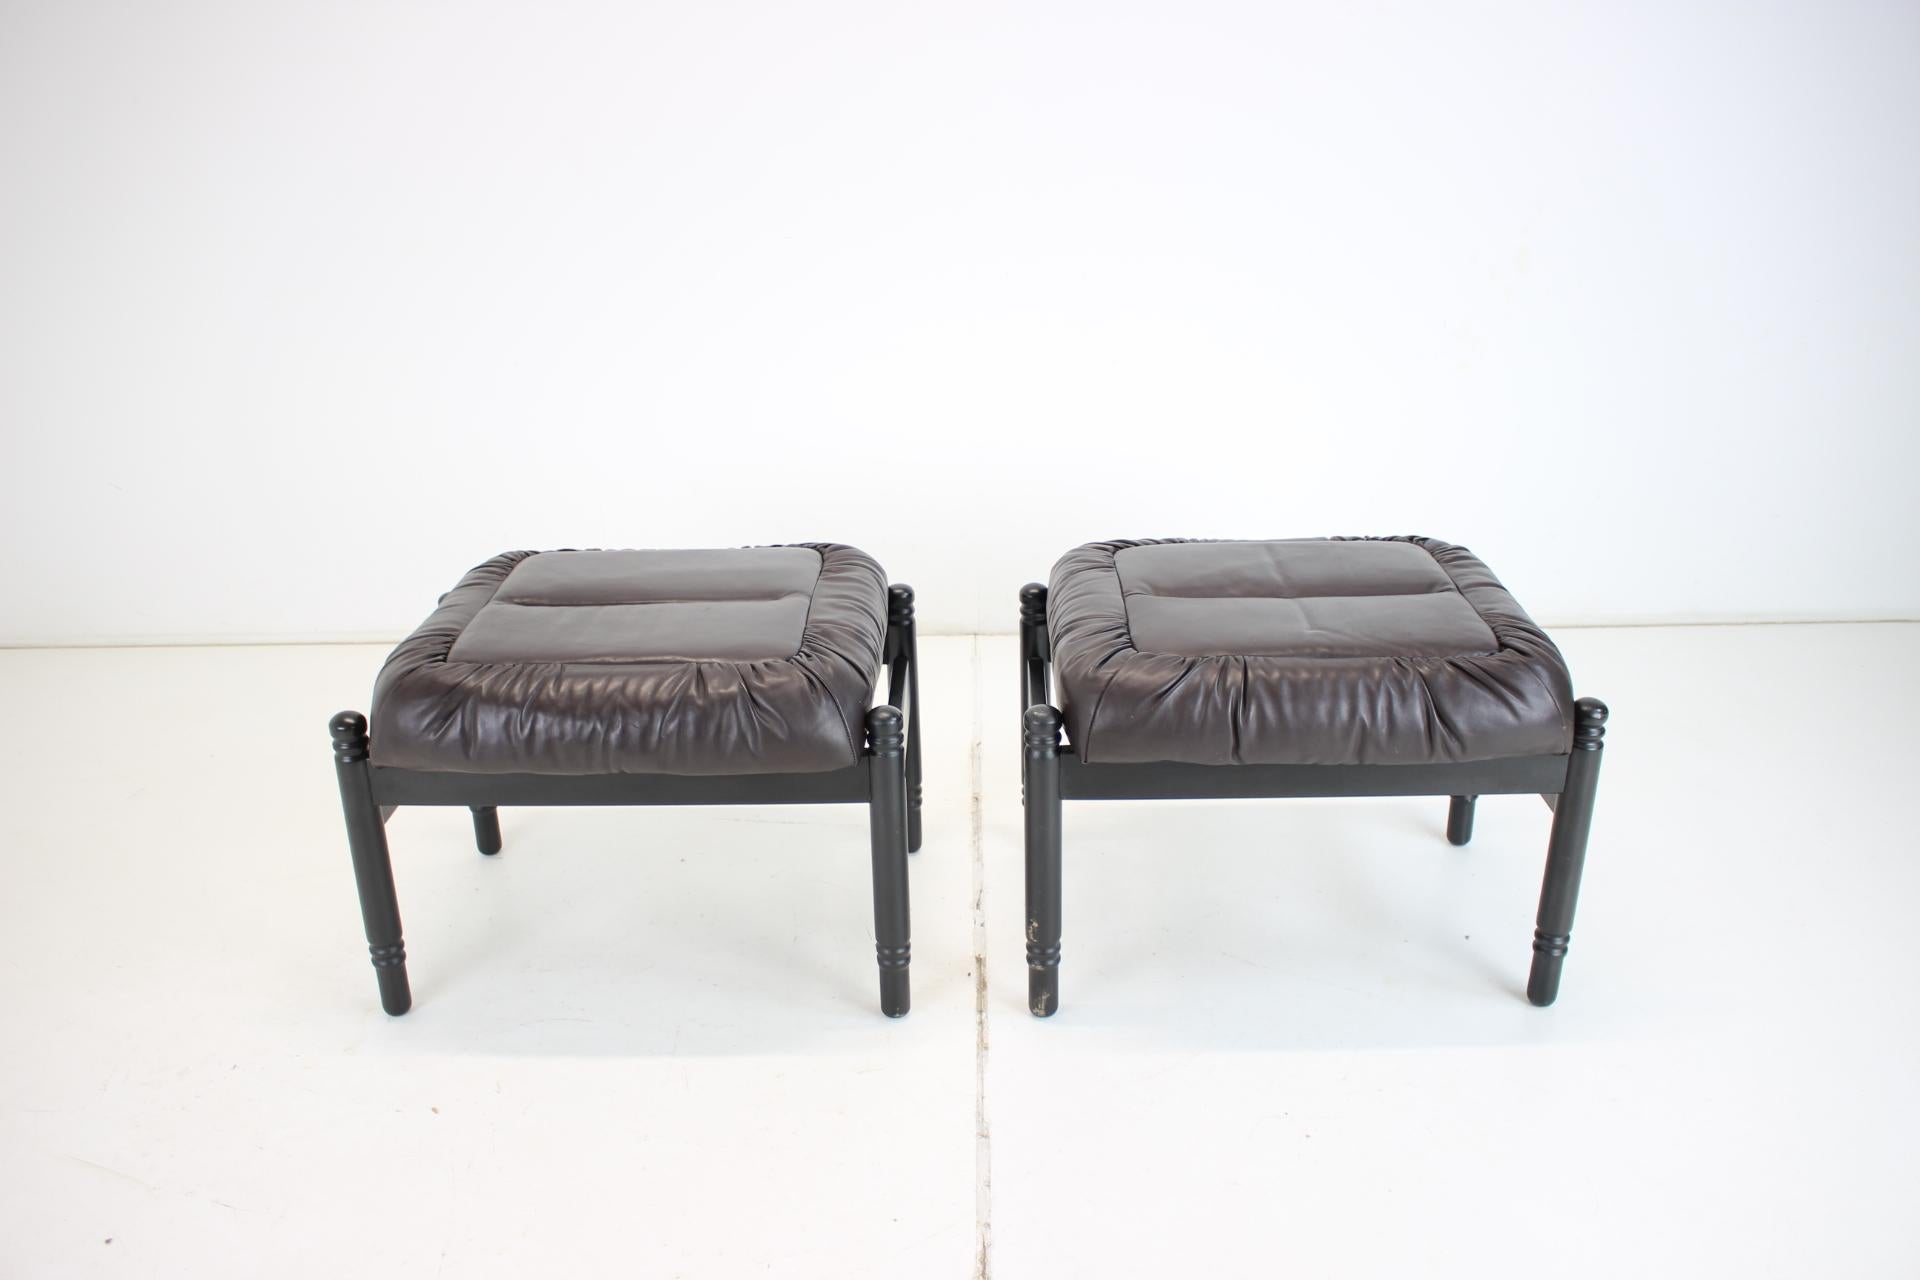 Mid-Century Modern 1980s Set of Stools made of Wood and Leather - STILLA LUX, Czechoslovakia For Sale